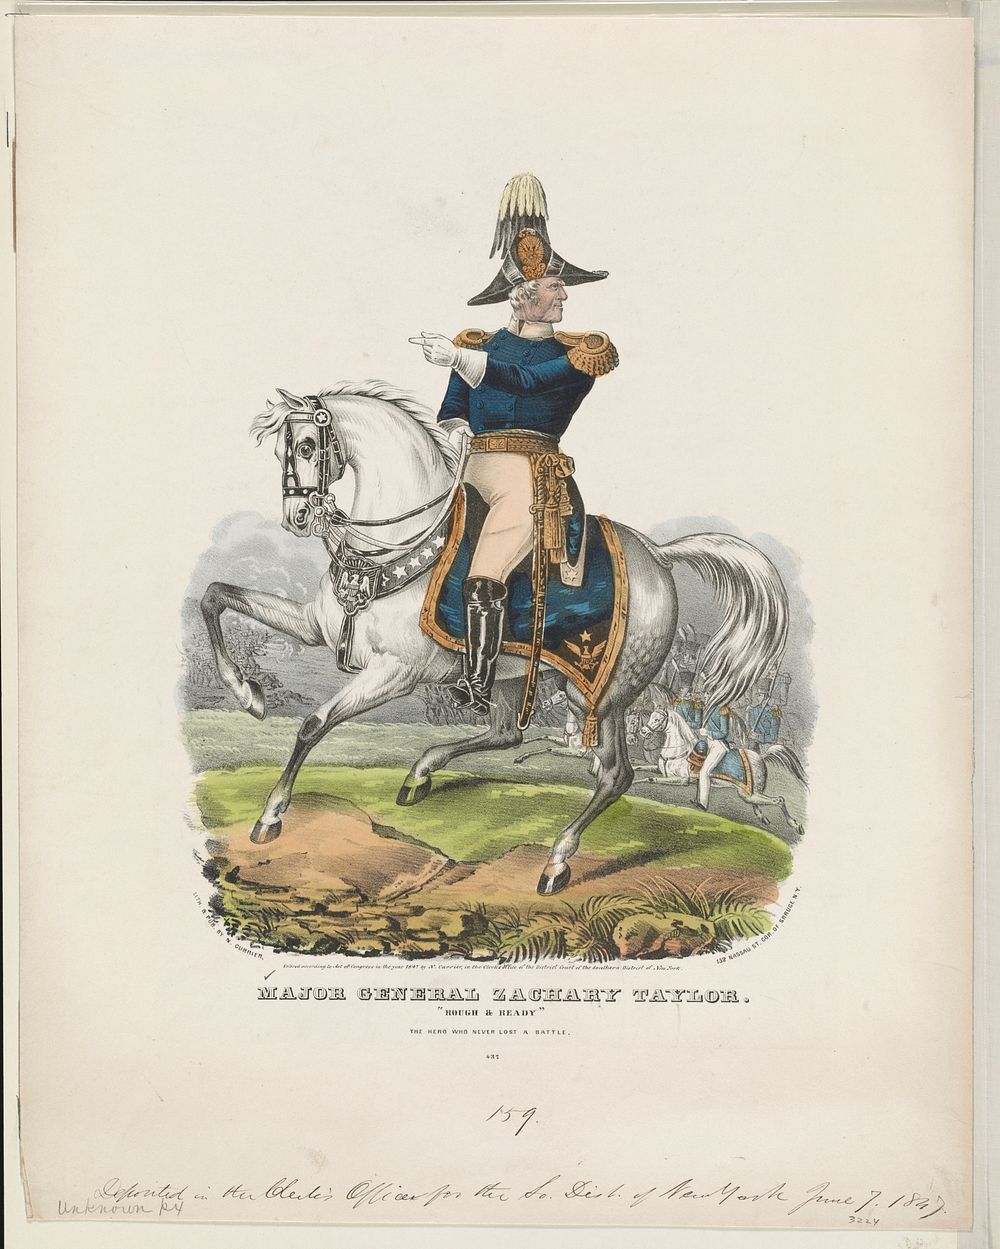 Major General Zachary Taylor: "rough & ready" (1847) by Currier & Ives.